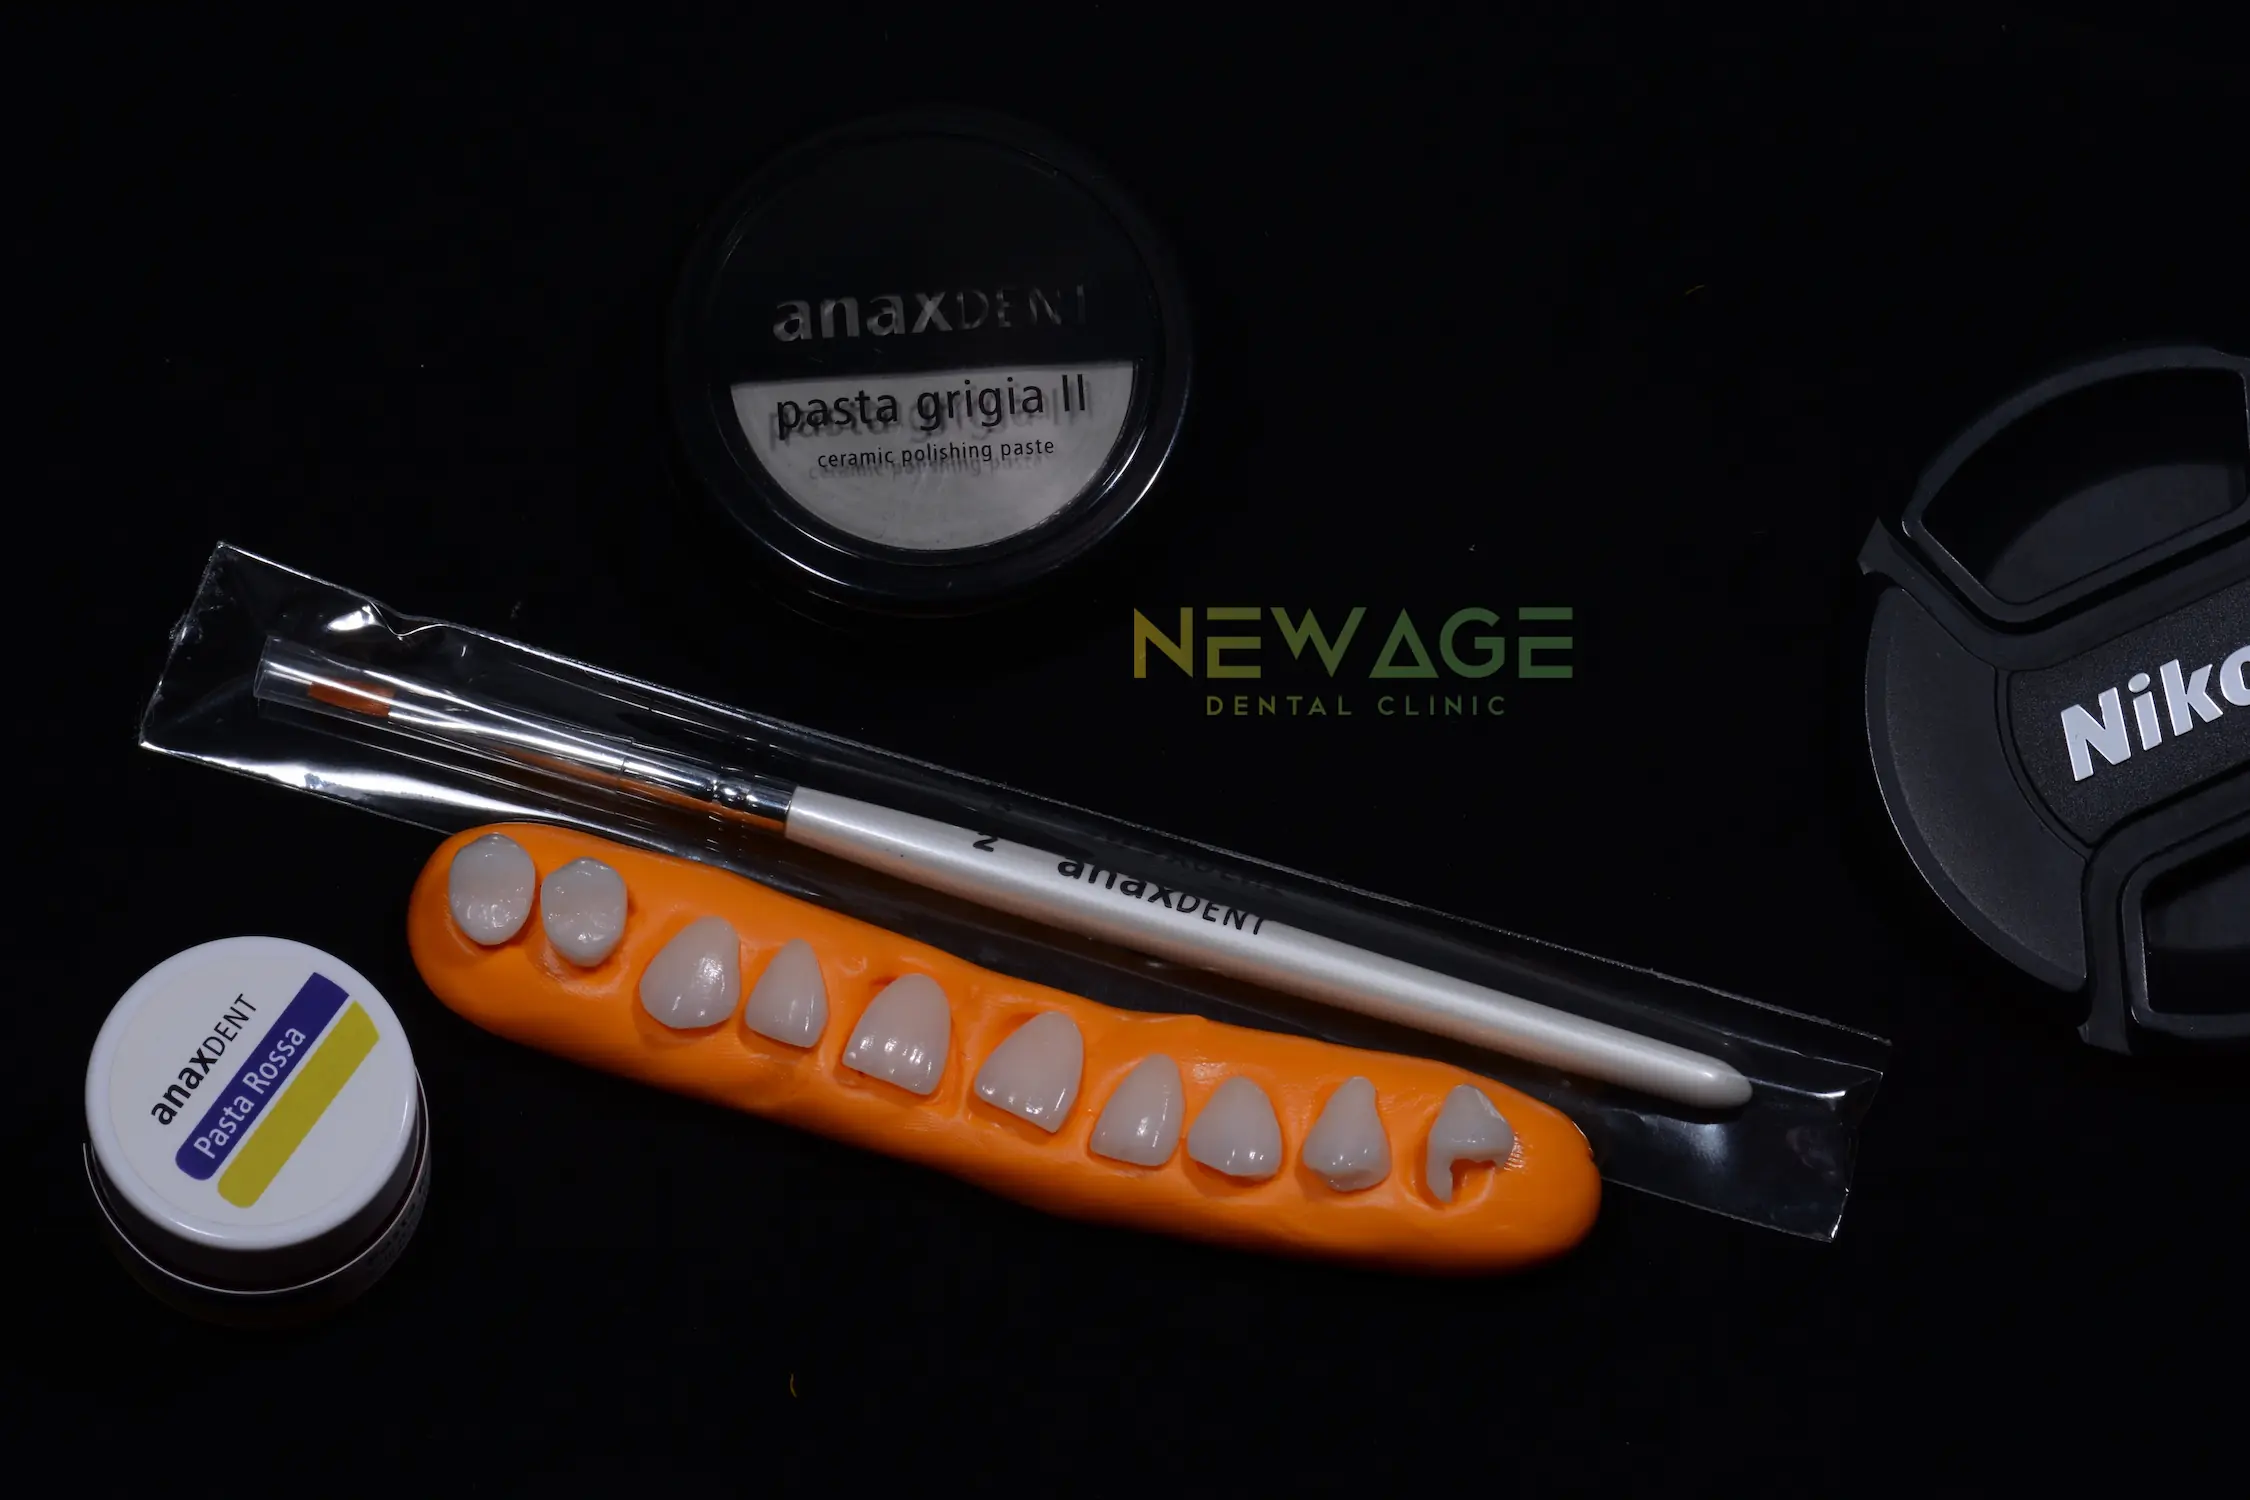 Newage teeth whitening kit designed for a perfect smile.